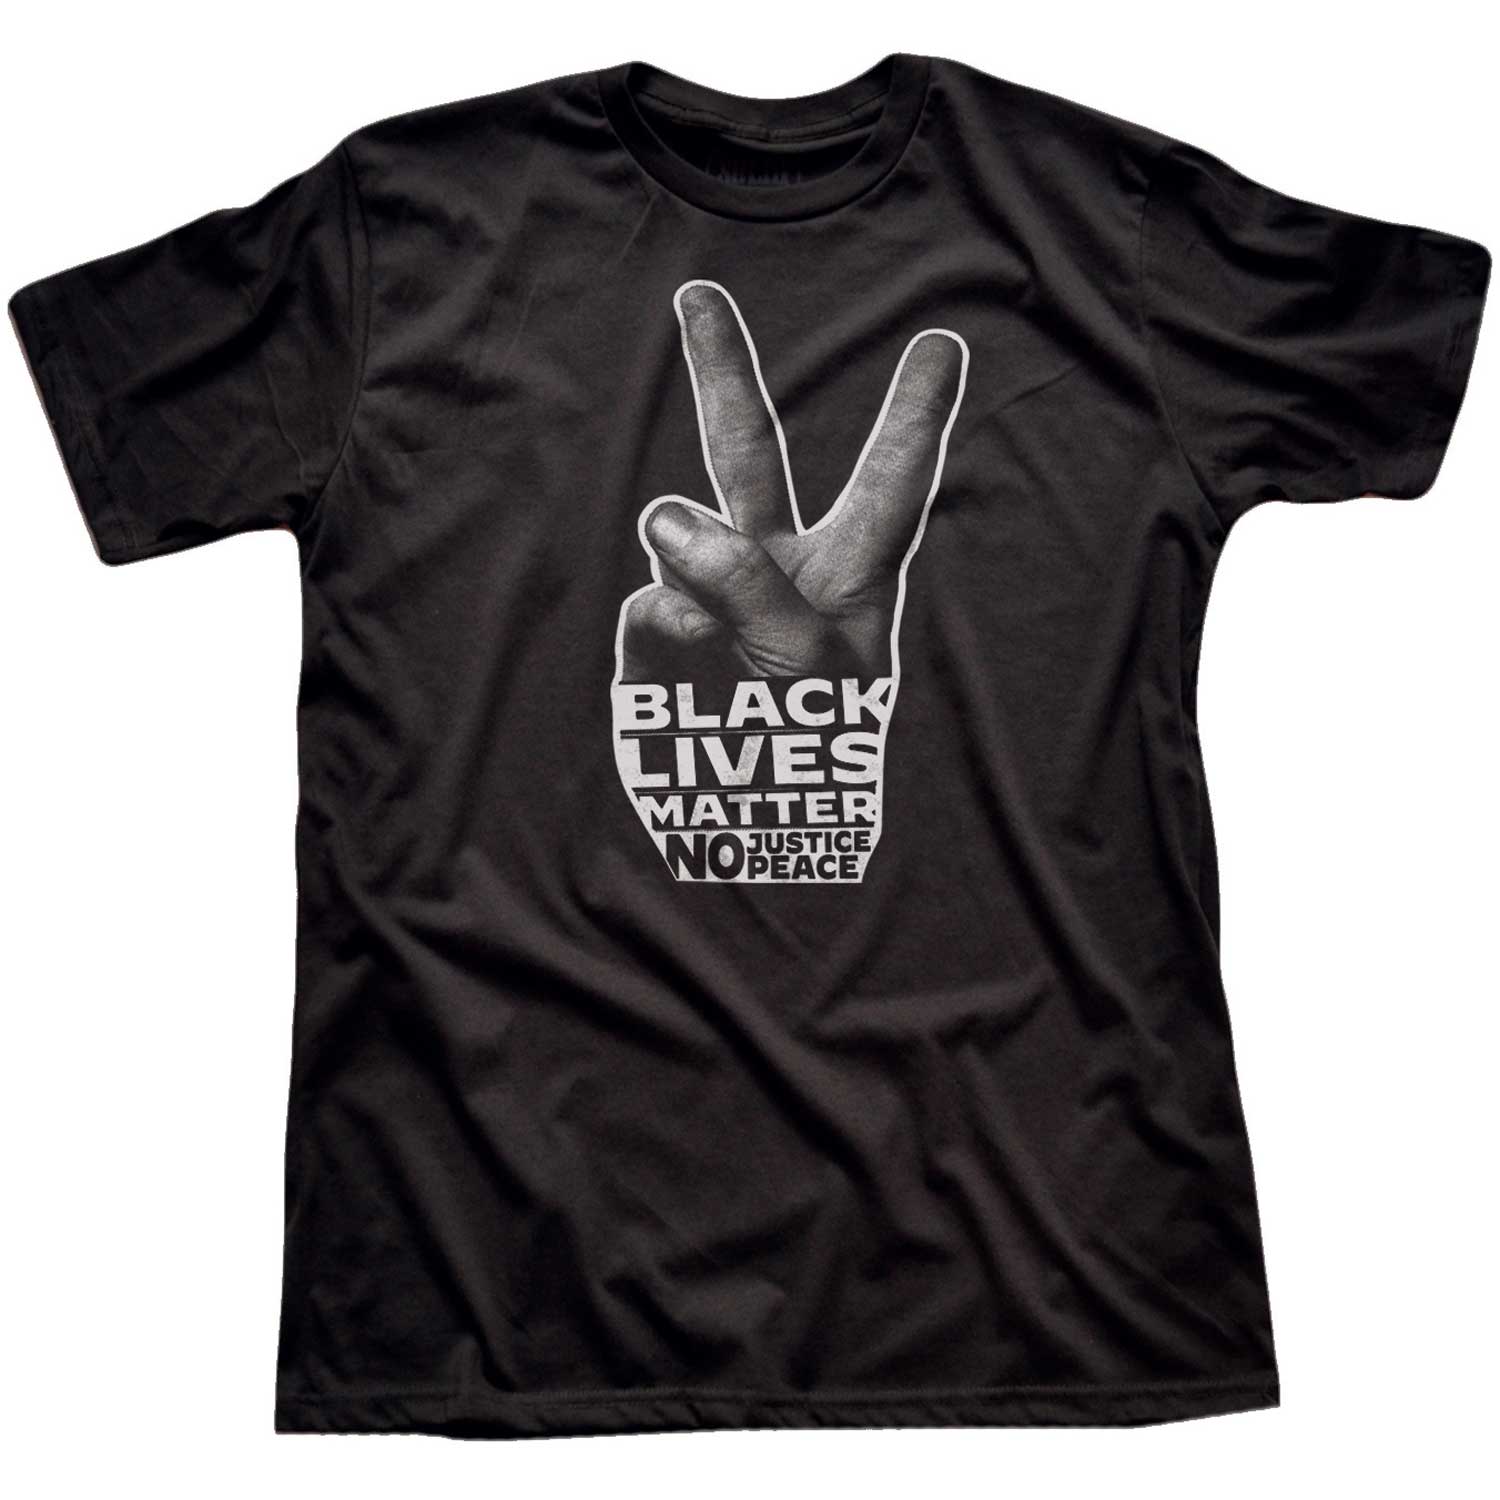 Men's Black Lives Matter Peace Hand Vintage Inspired T-shirt | Cool BLM Graphic Tee | Solid Threads